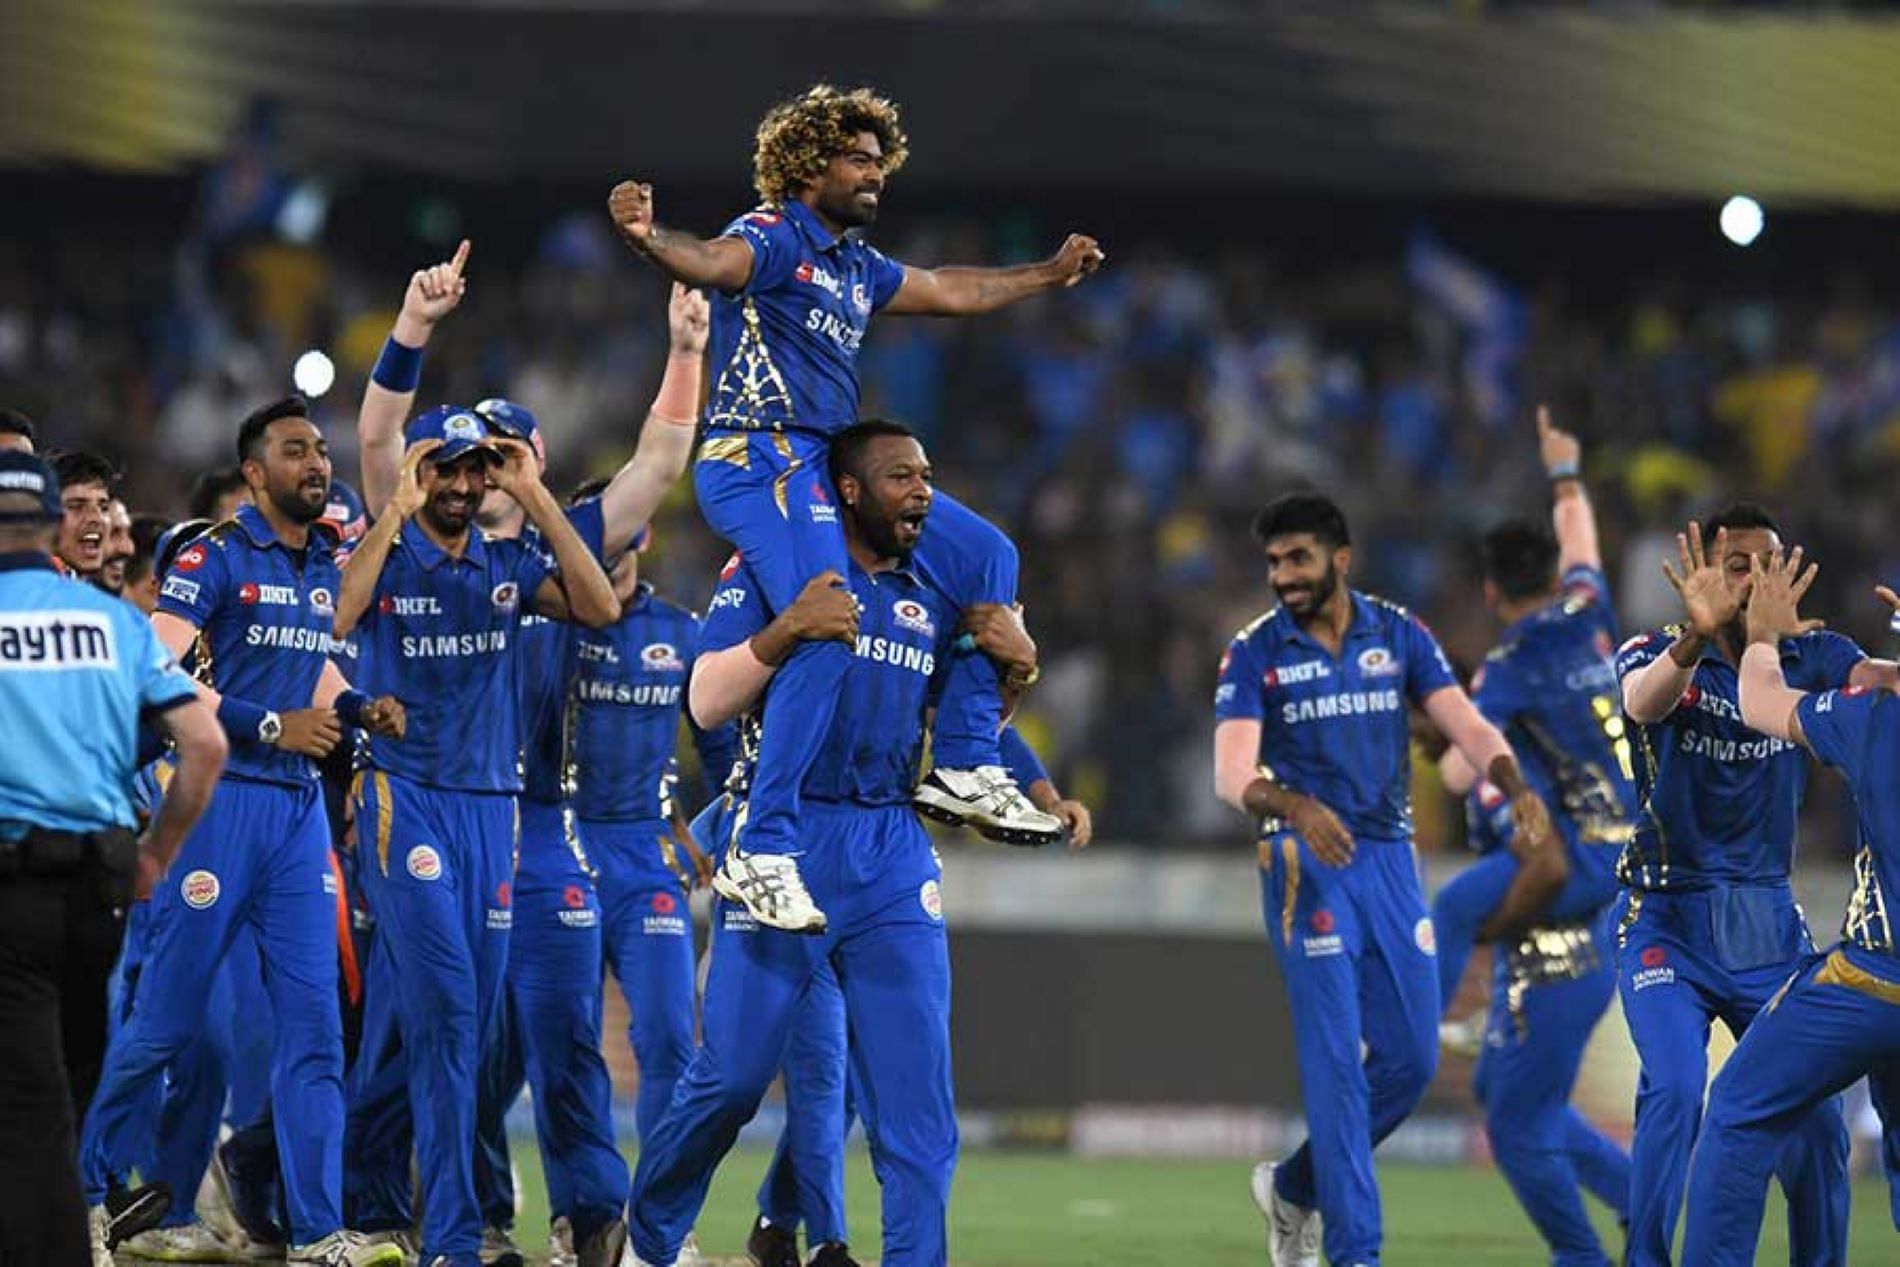 Malinga will reunite with Kieron Pollard and several others from his MI playing days.